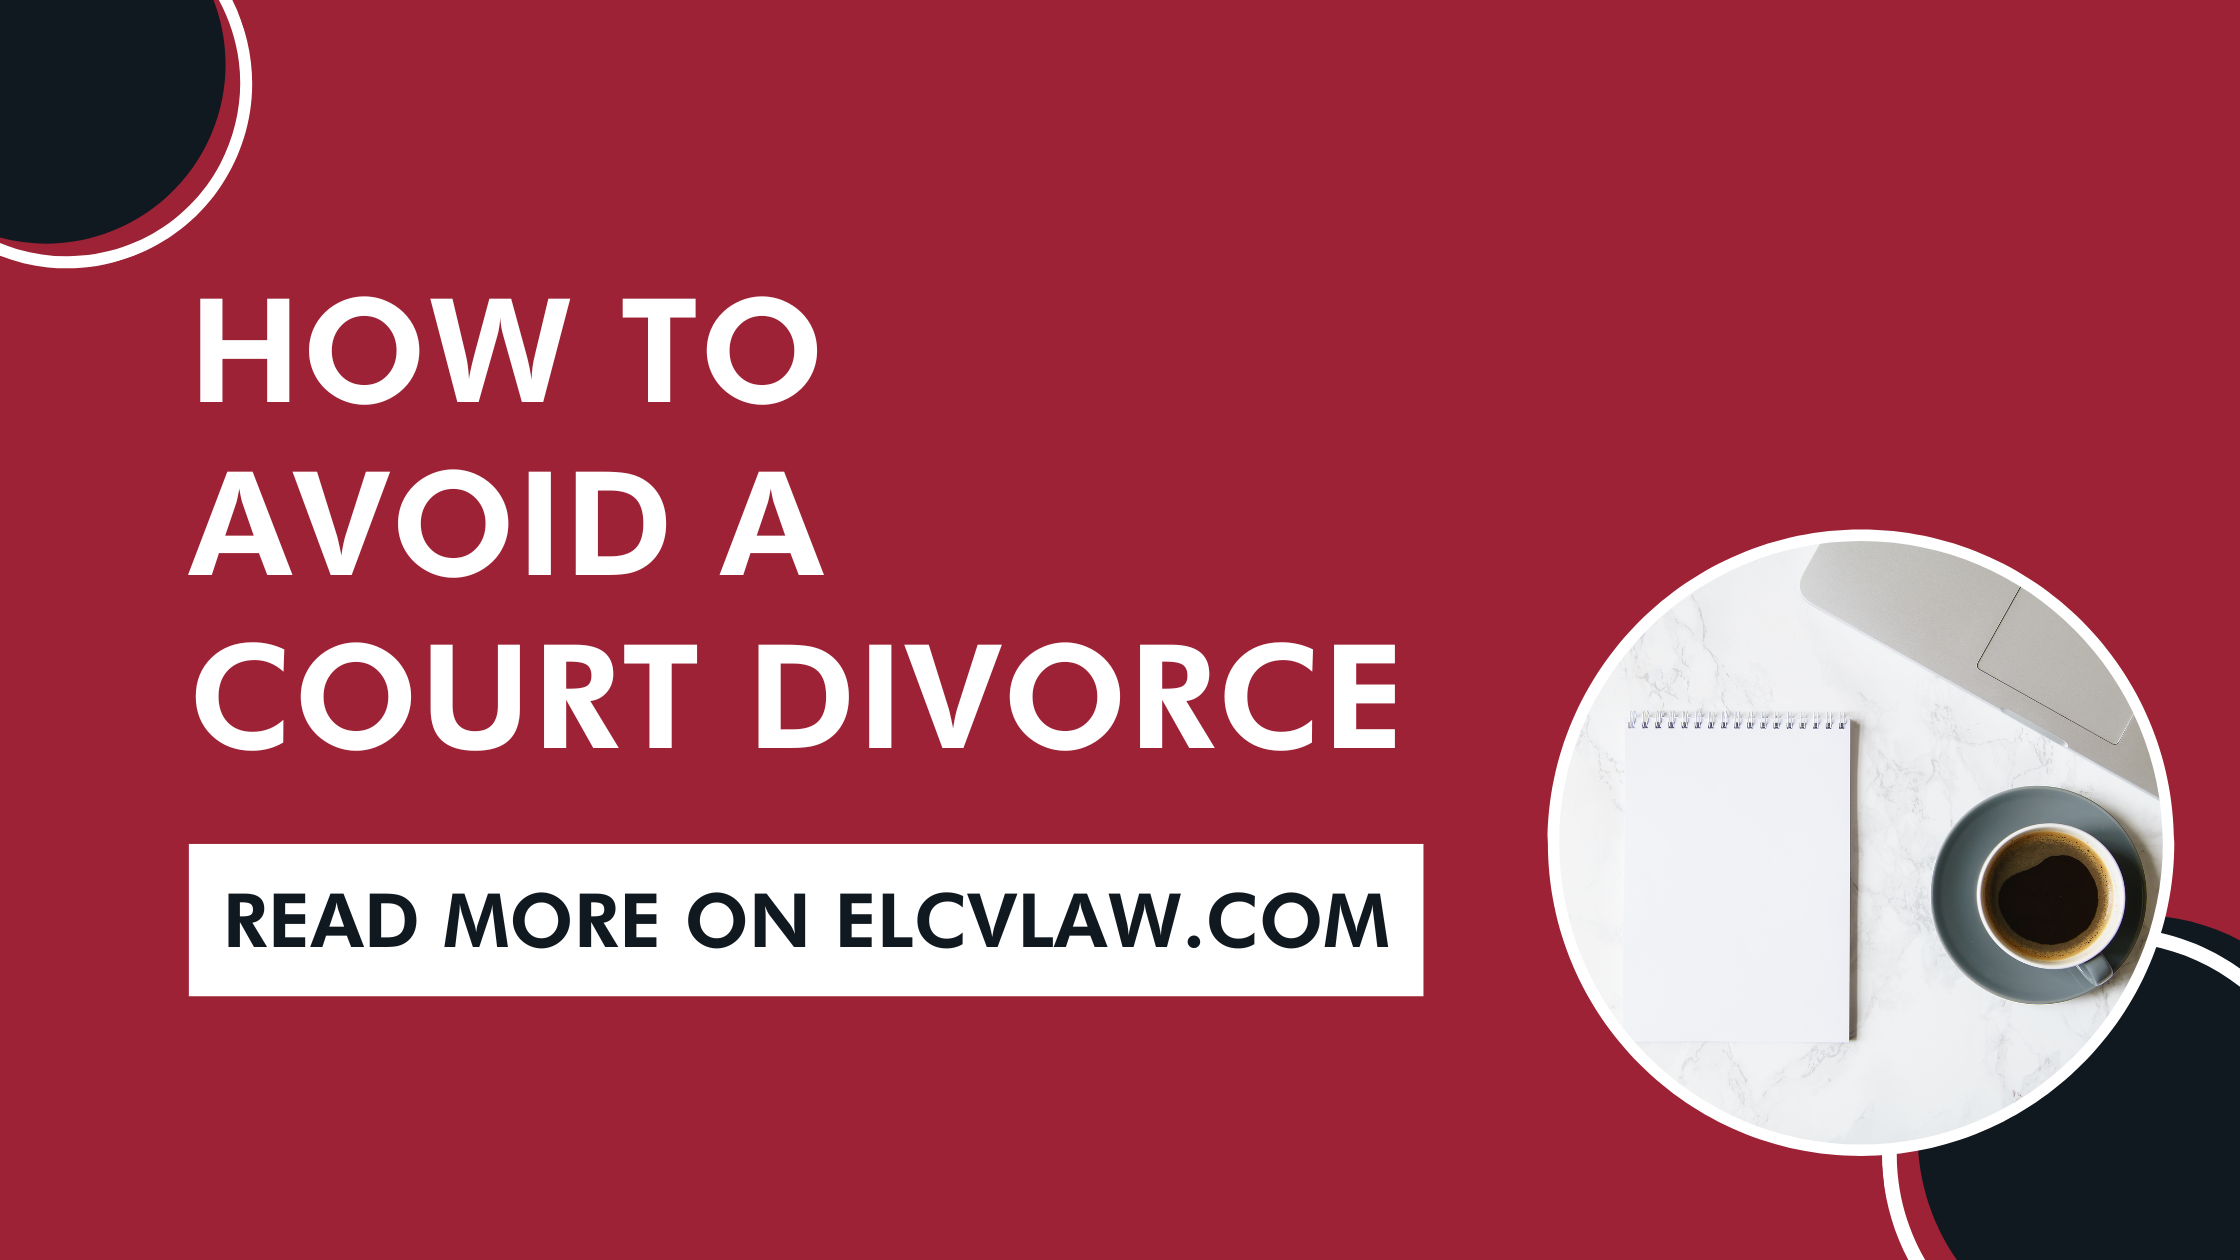 How to Avoid a Court Divorce